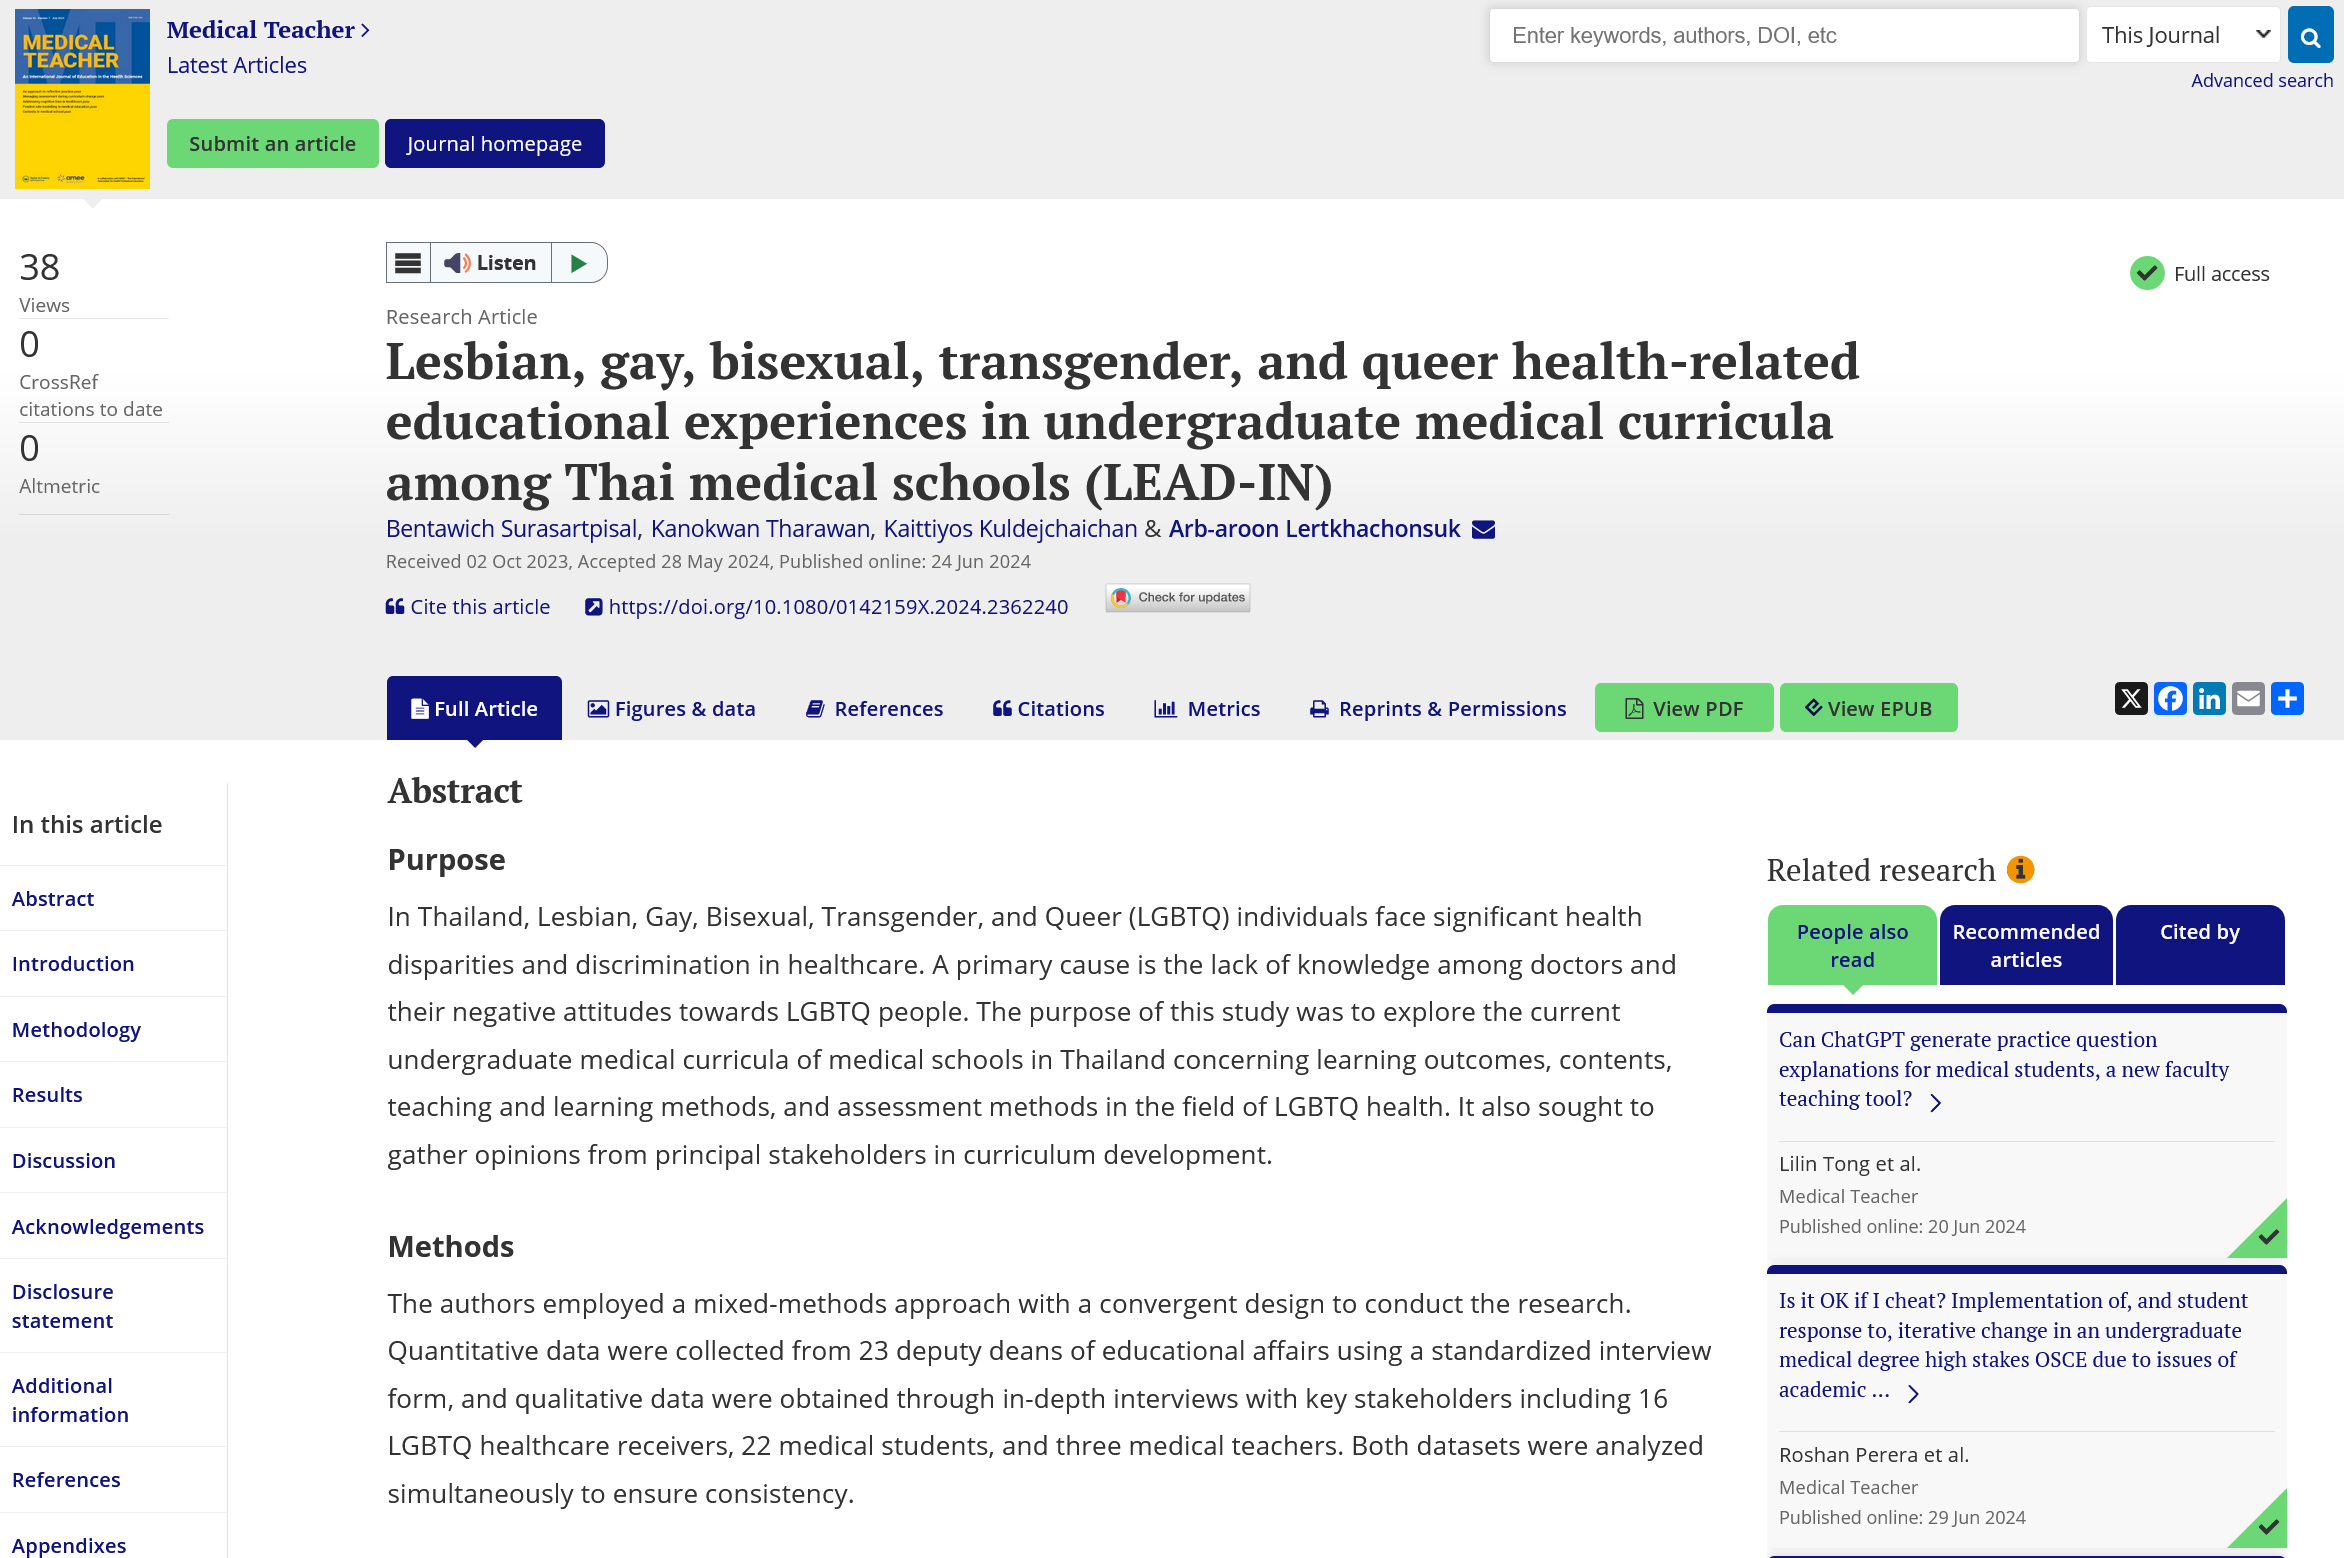 Lesbian, gay, bisexual, transgender, and queer health-related educational experiences in undergraduate medical curricula among Thai medical schools (LEAD-IN)